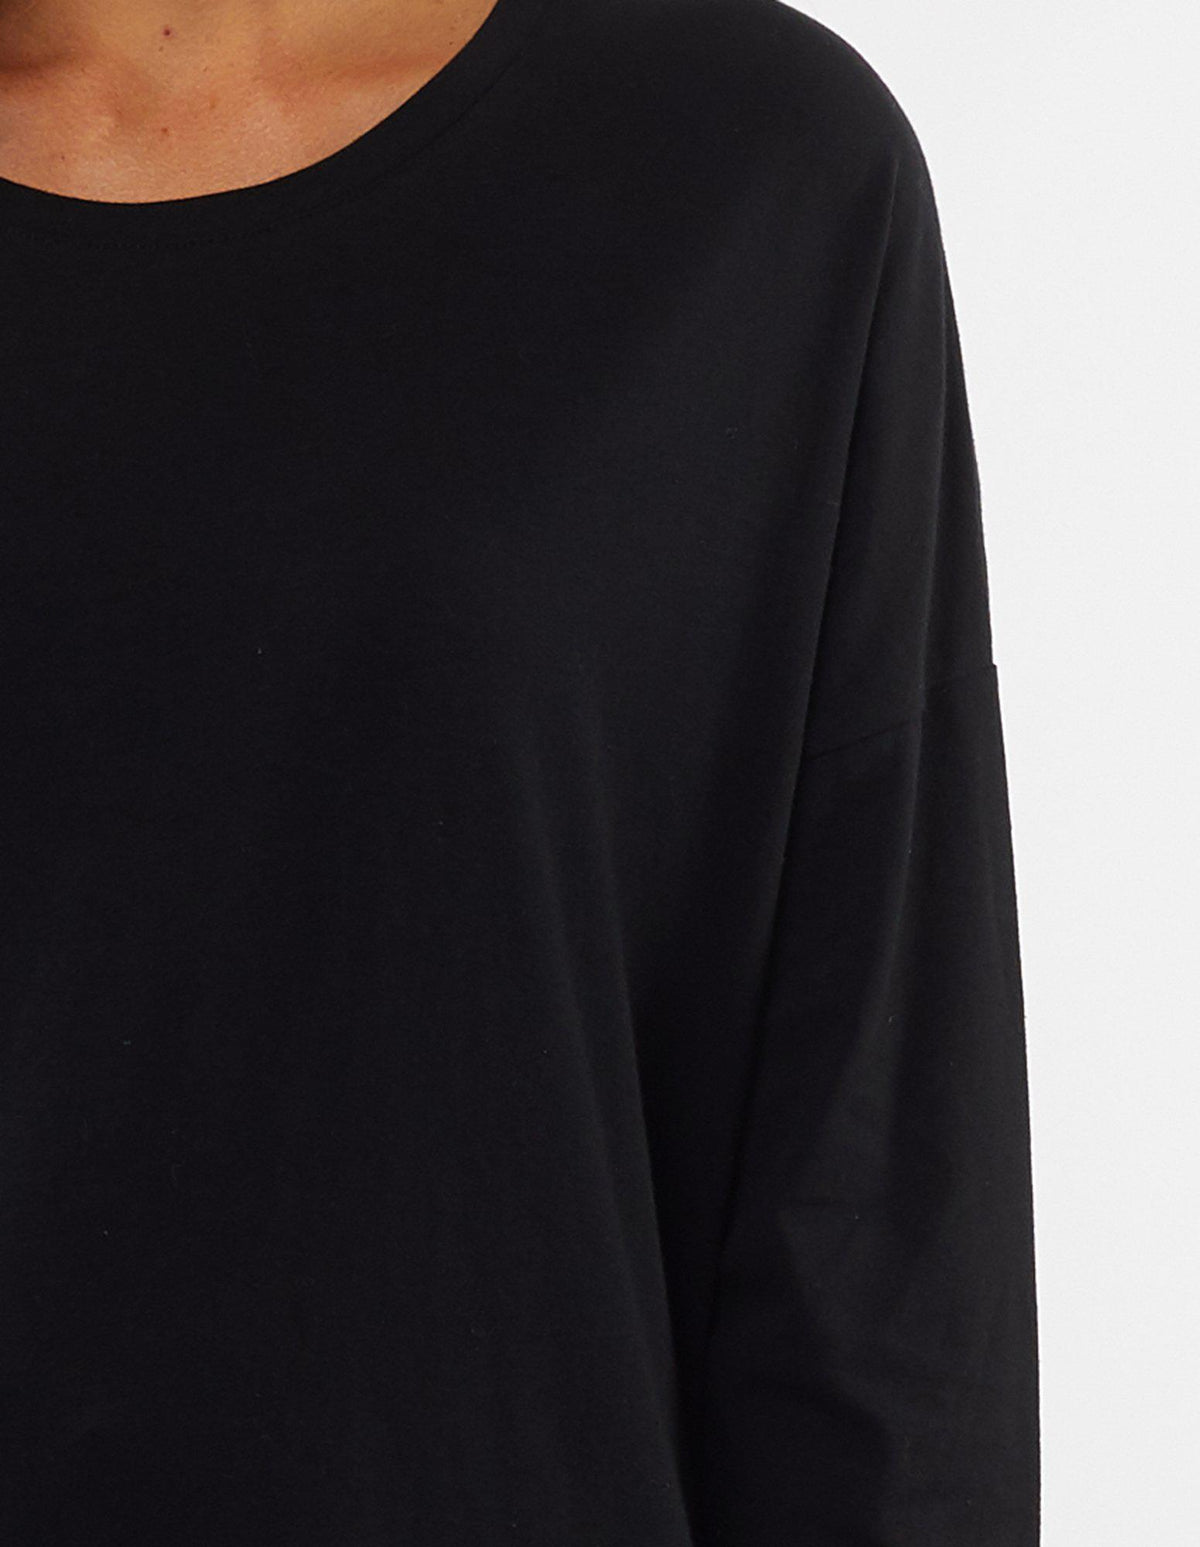 Society L/S Tee - Black - Elm Lifestyle - FUDGE Gifts Home Lifestyle